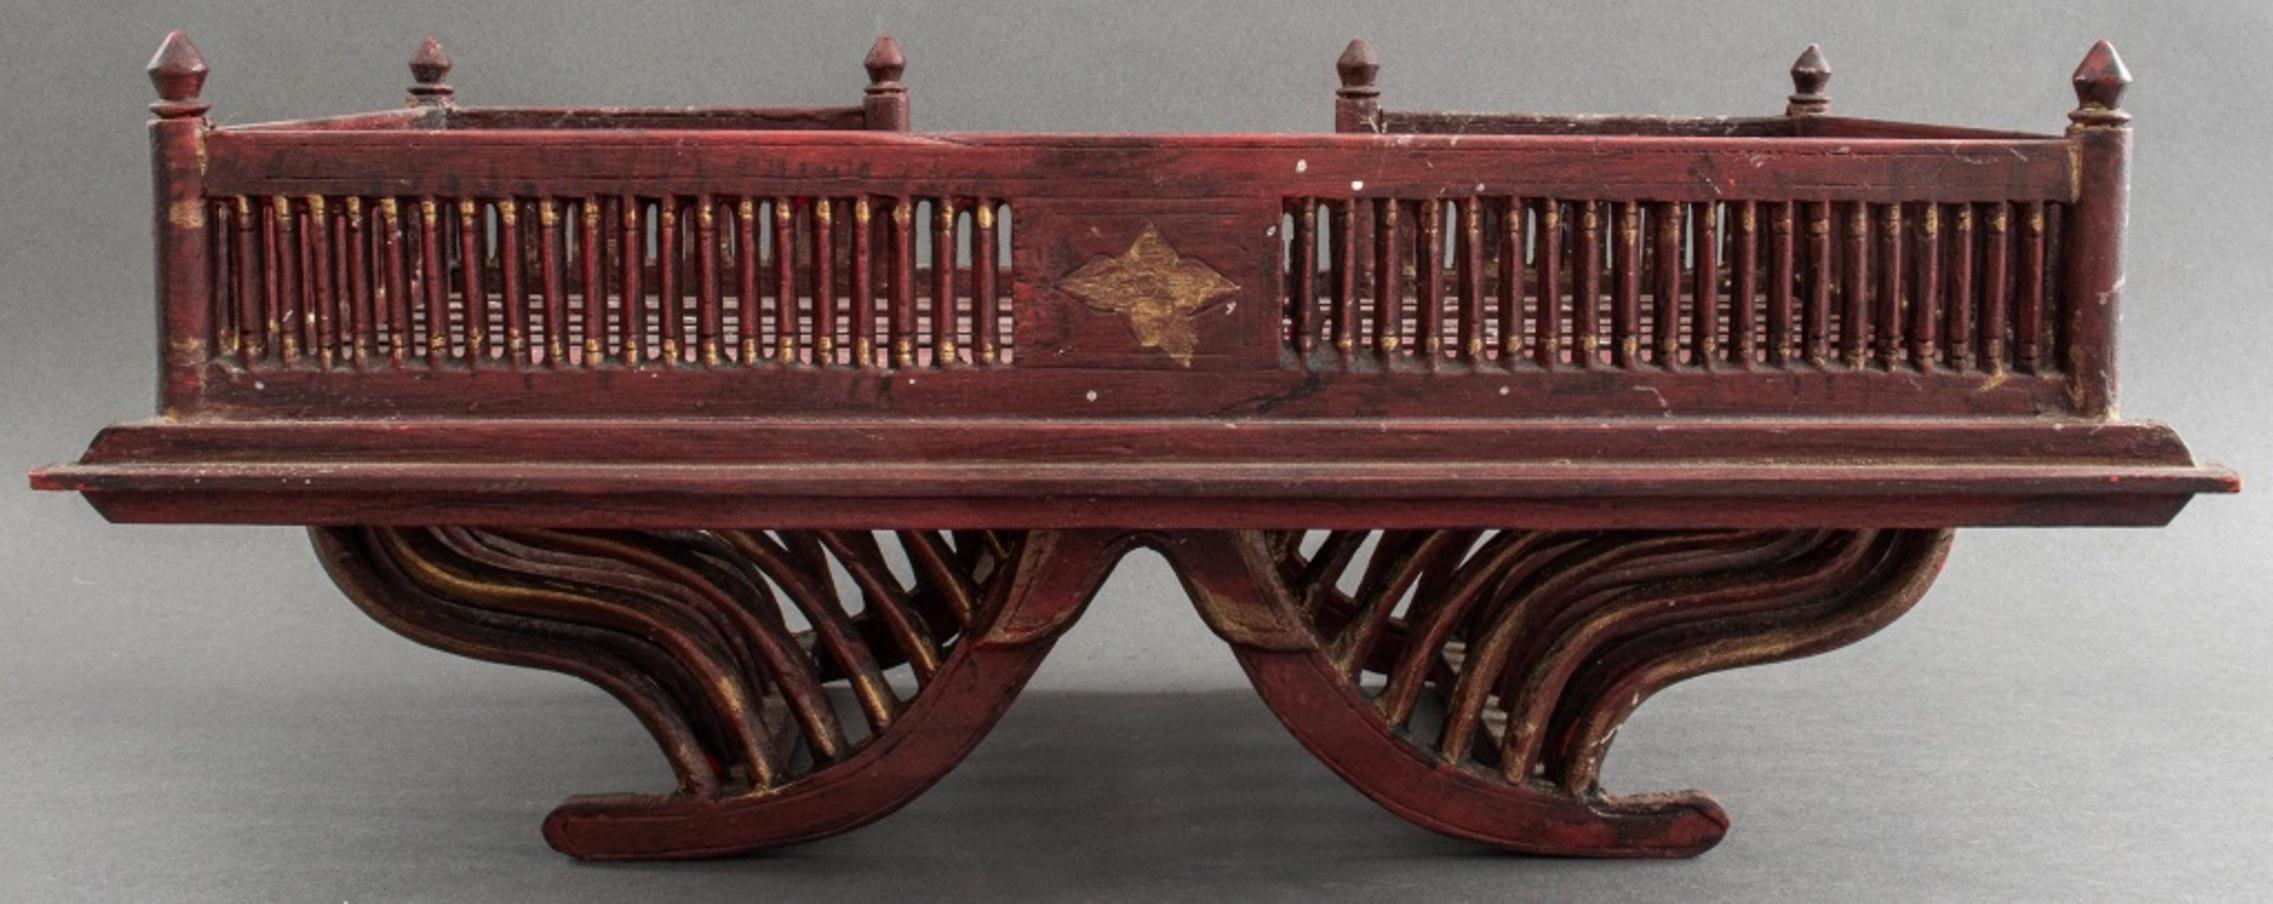 Stained Indian Raj Period Miniature Howdah, ca. 1920 For Sale